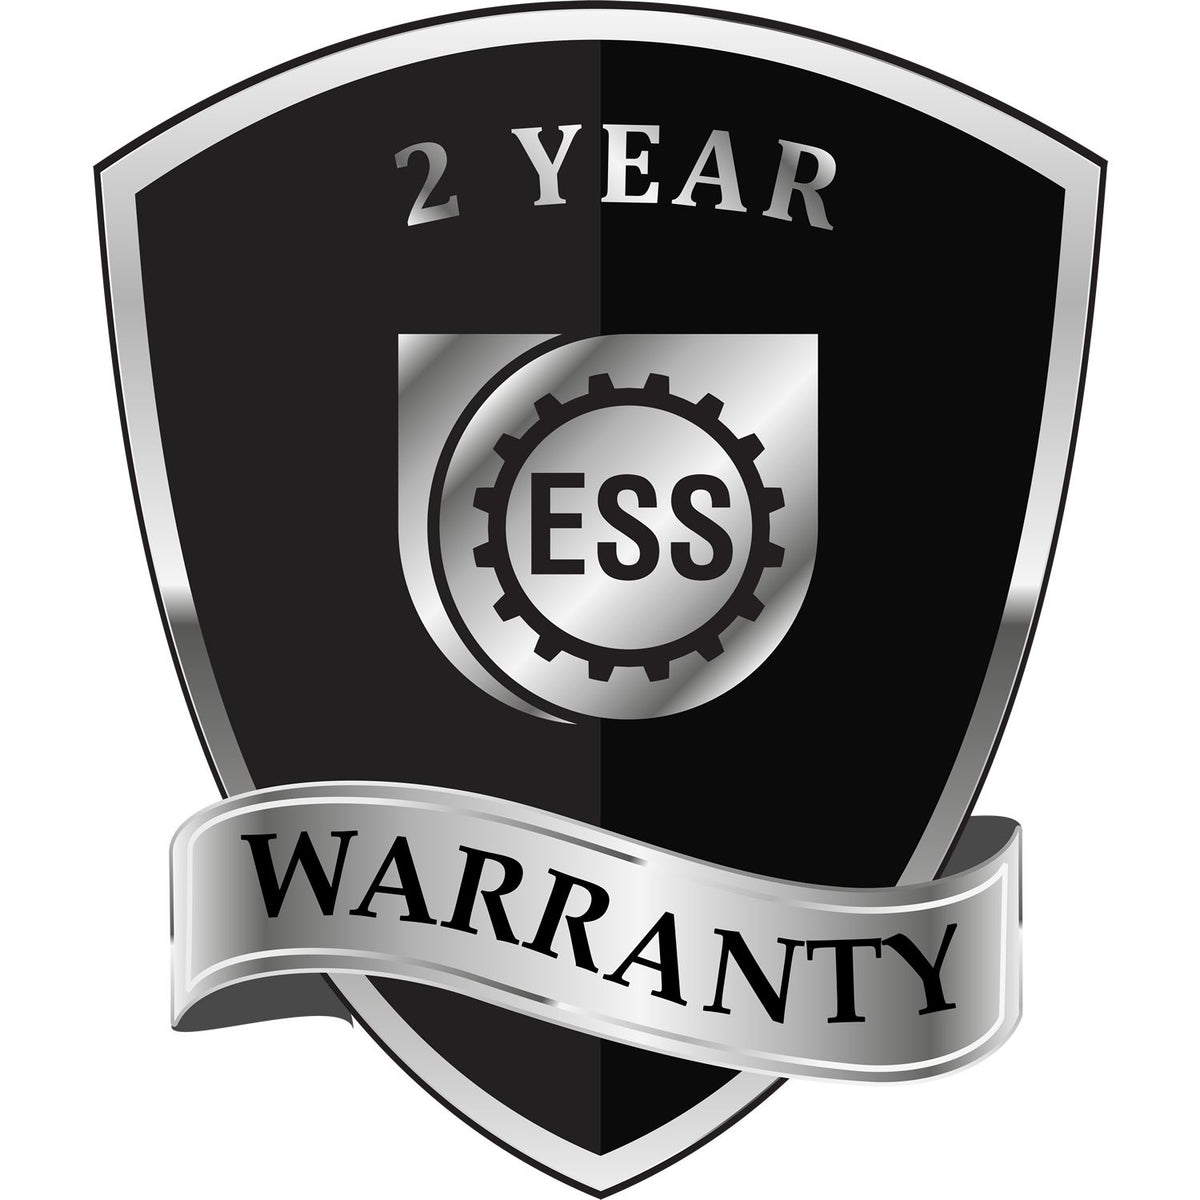 A black and silver badge or emblem showing warranty information for the Hybrid South Dakota Engineer Seal